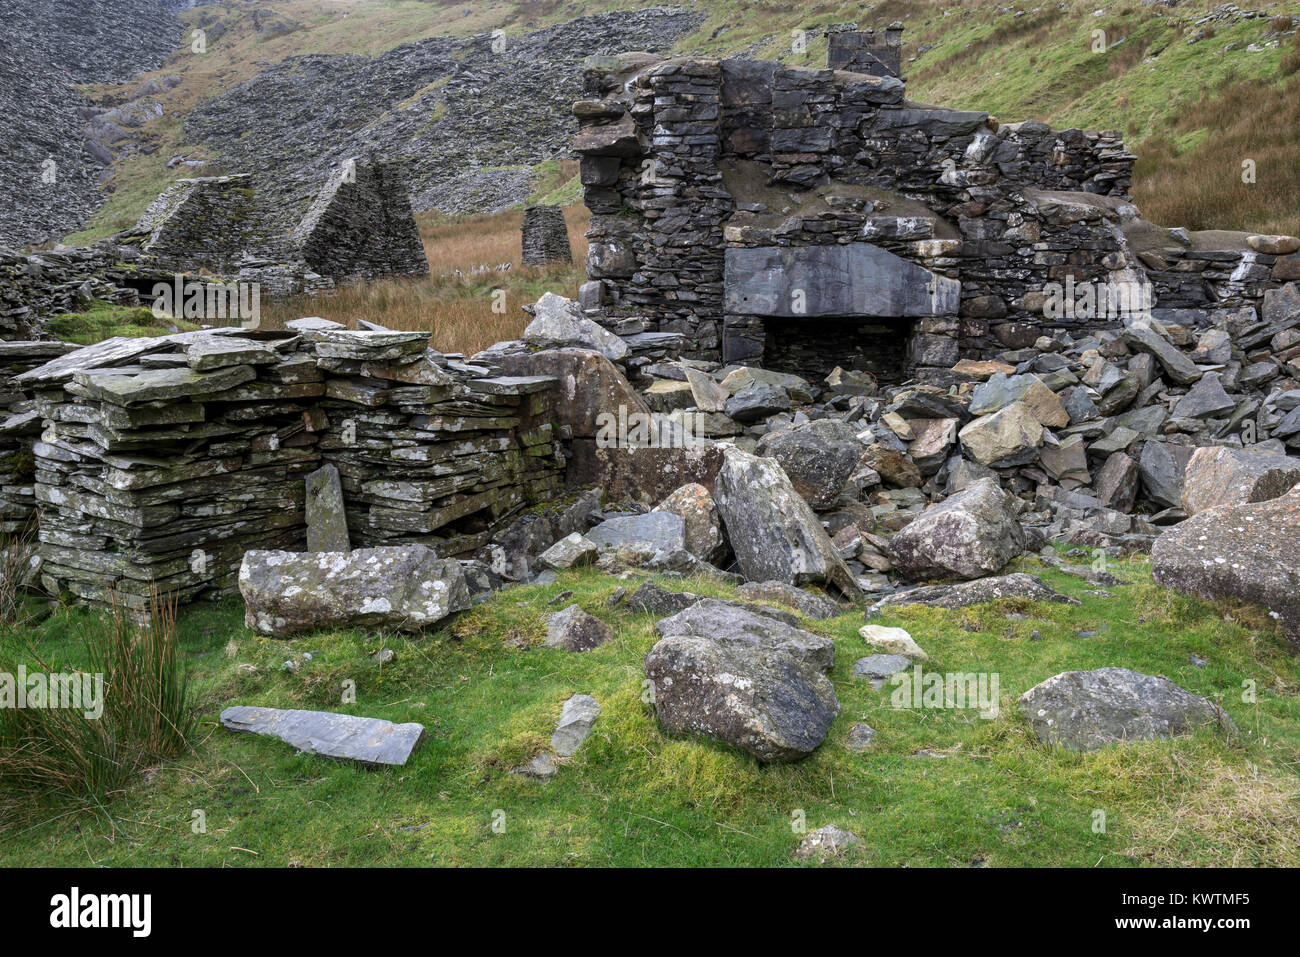 Ruined buildings at the old disused quarry at Cwmorthin, Blaenau Ffestiniog, North Wales. A dramatic and remote location in the mountains. Stock Photo